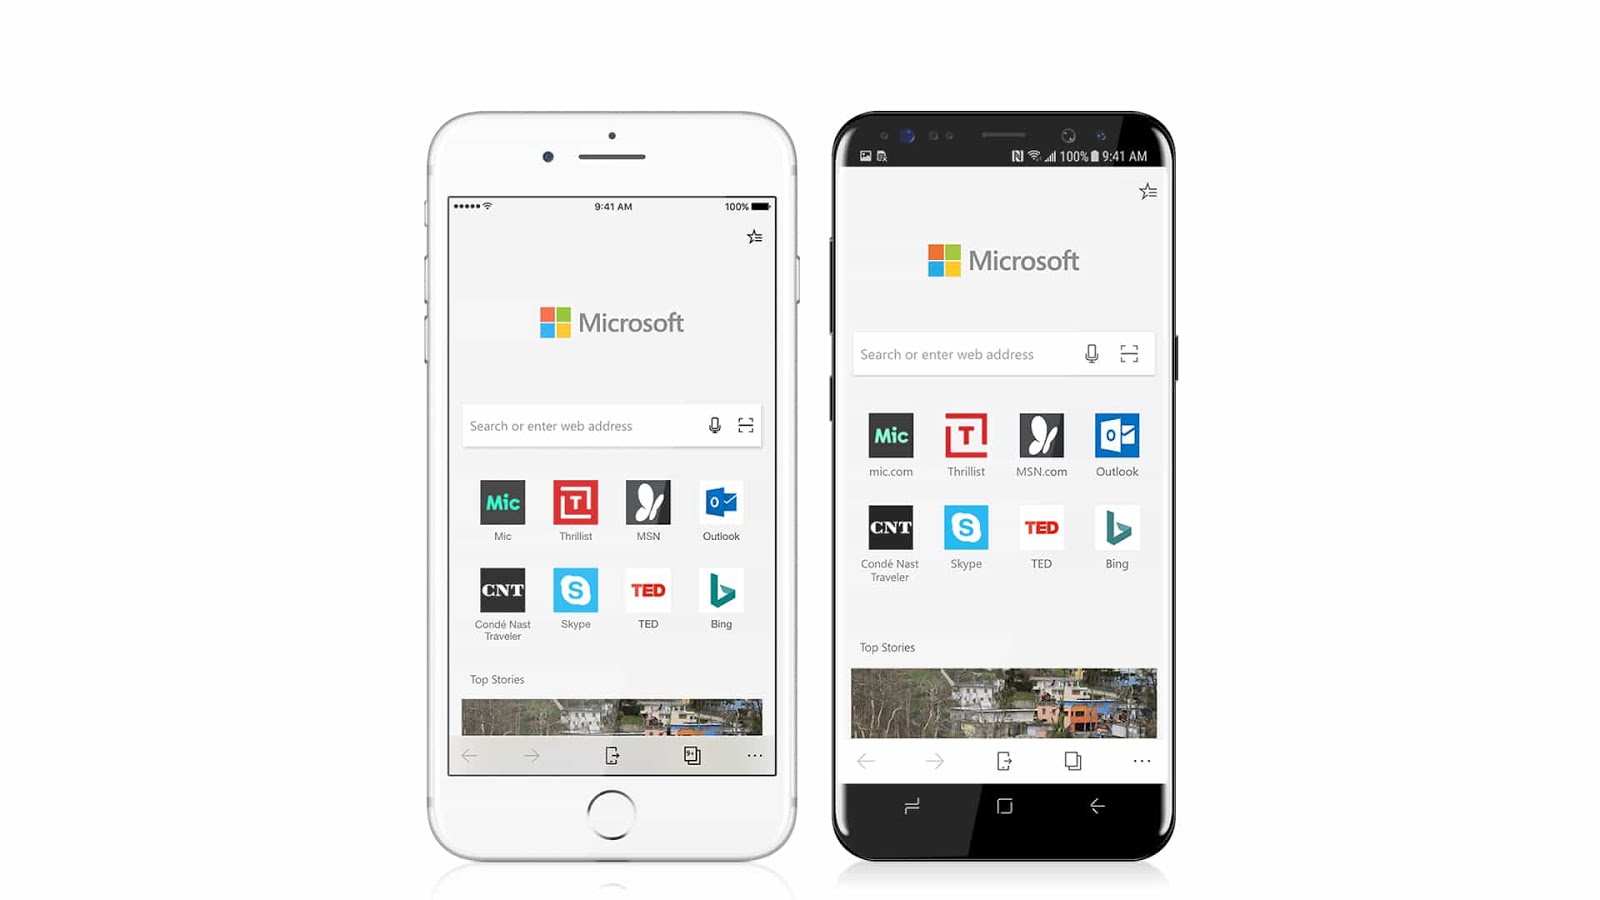 After a pre-release of beta version of Edge Browser earlier this month, Microsoft has released final version of the app on Apple’s Appstore.